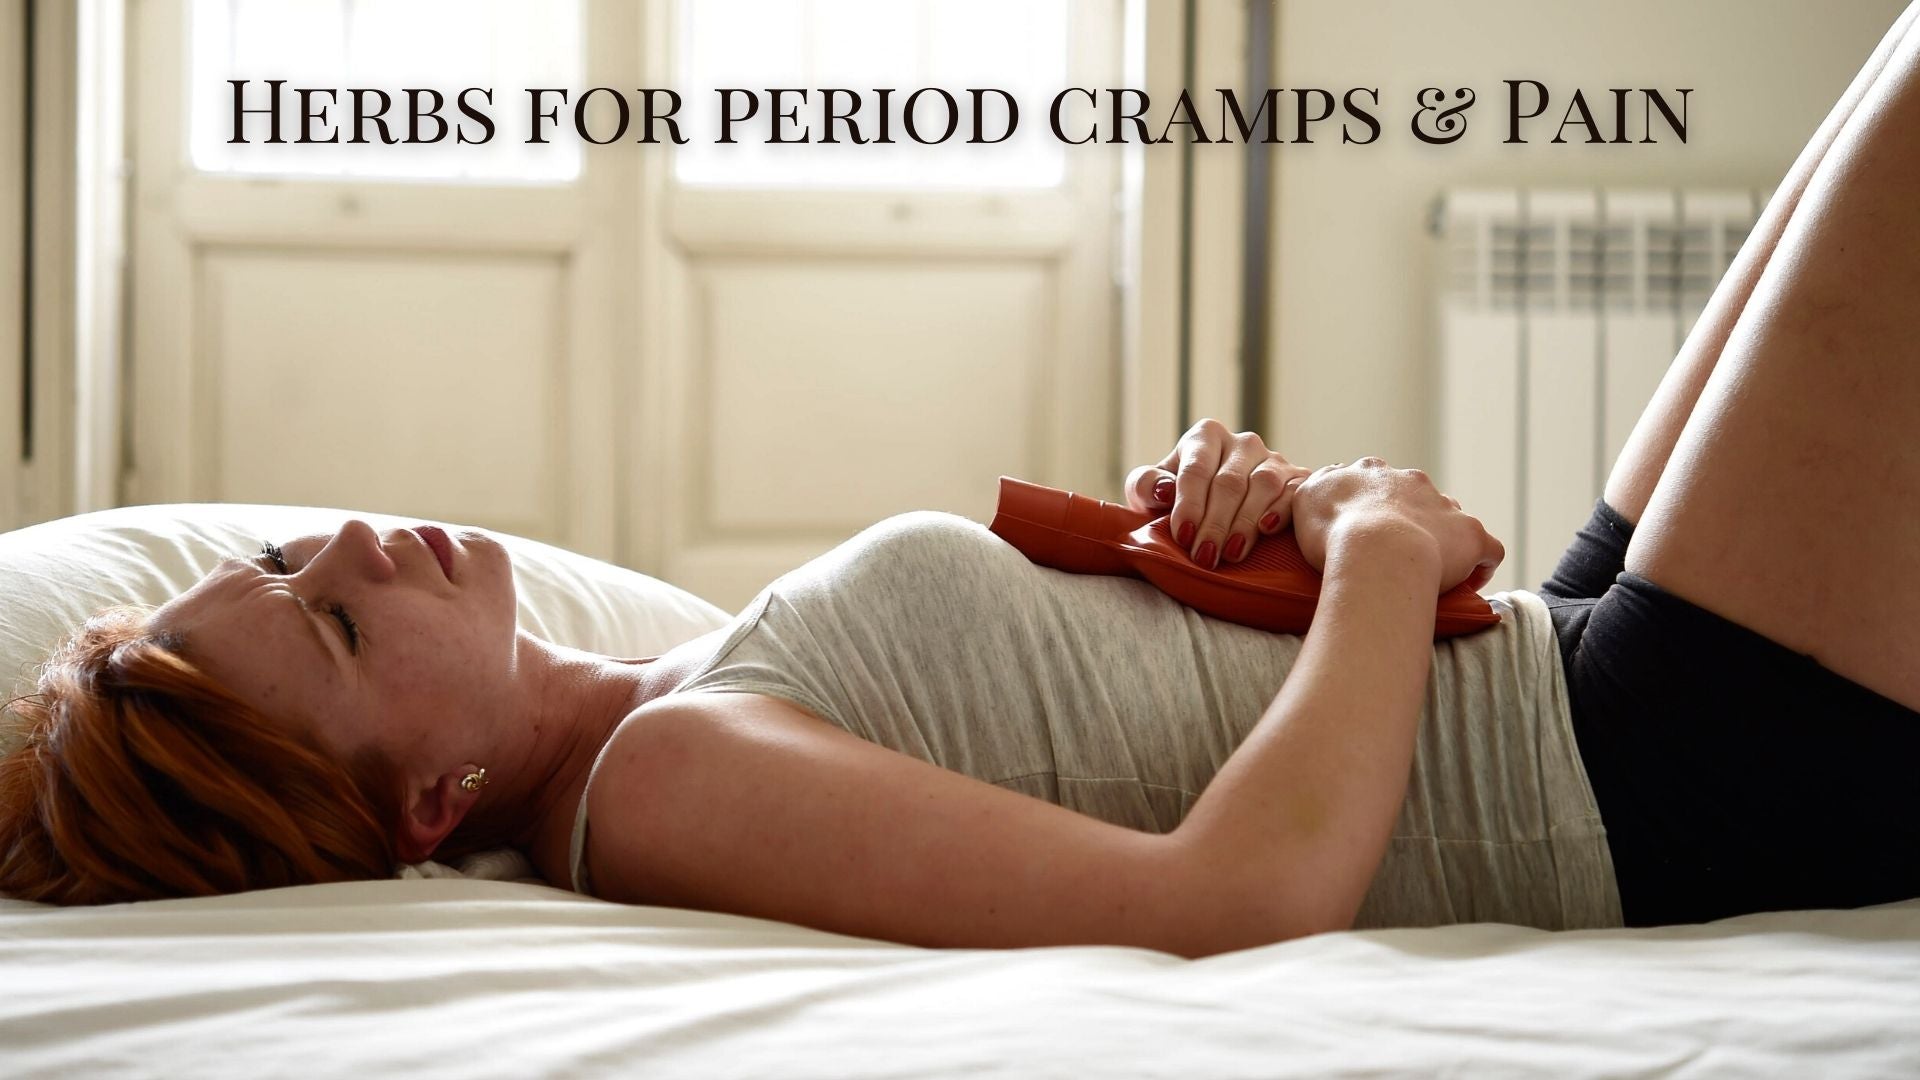 Herbs for Period Cramps & Pain